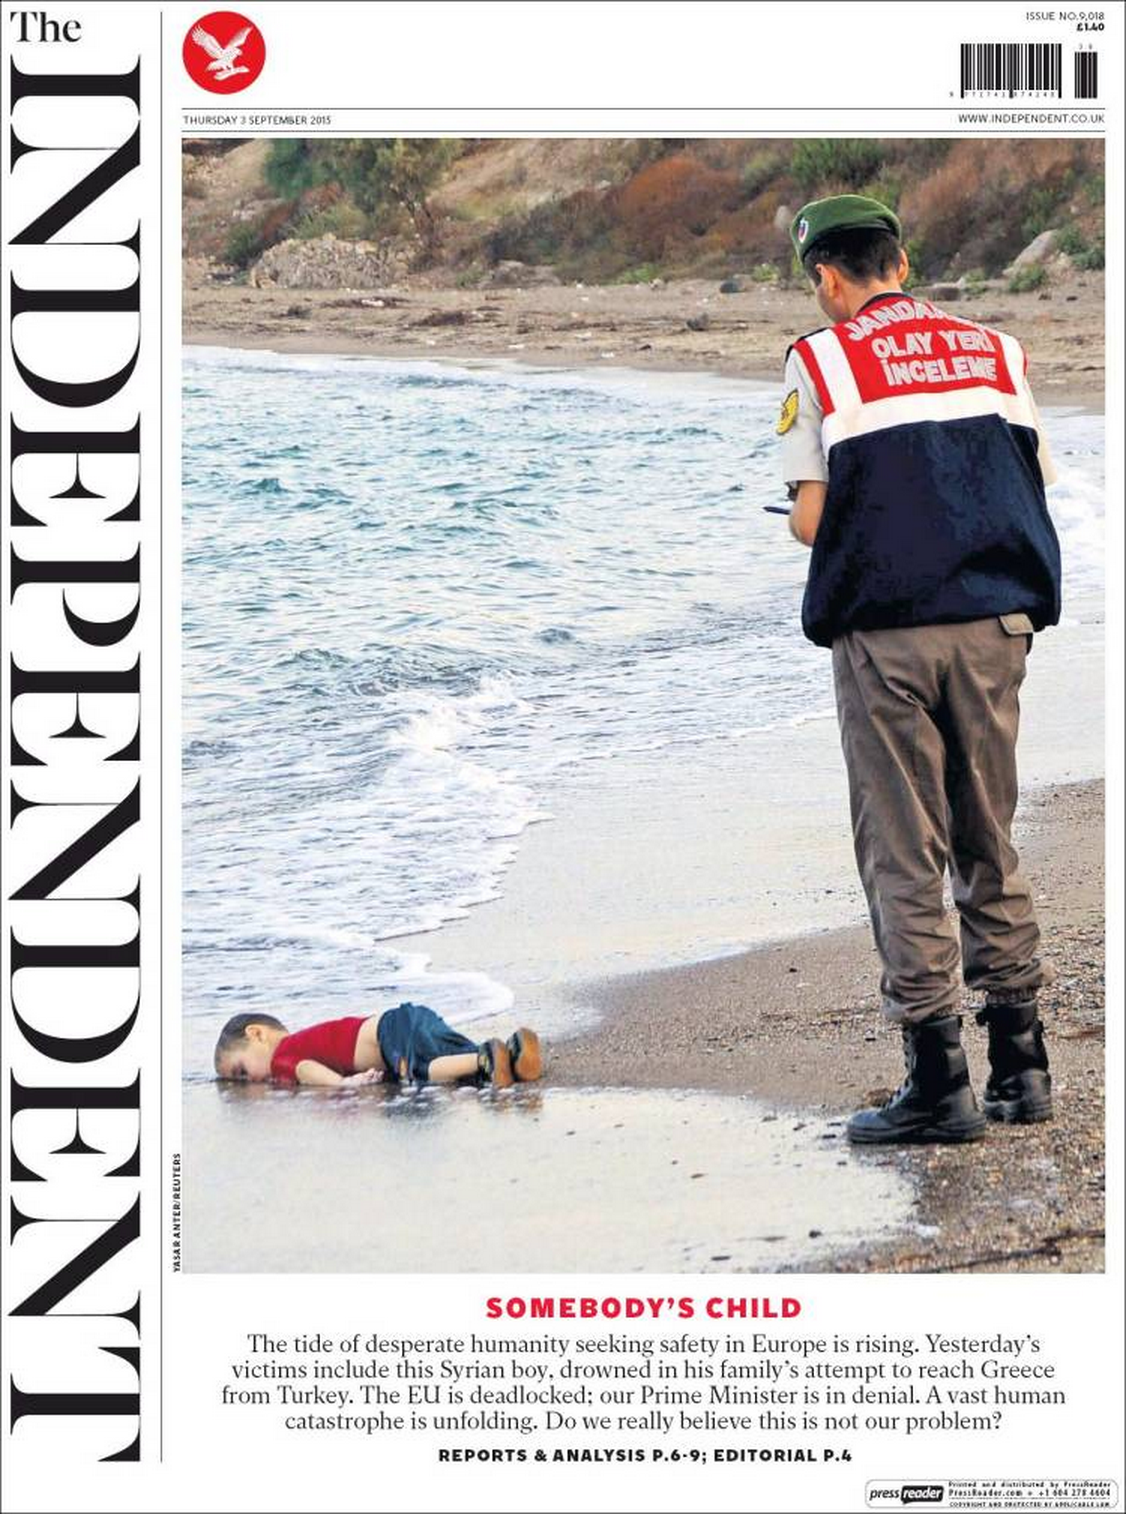 Drowned Migrant Boy The Independent front page